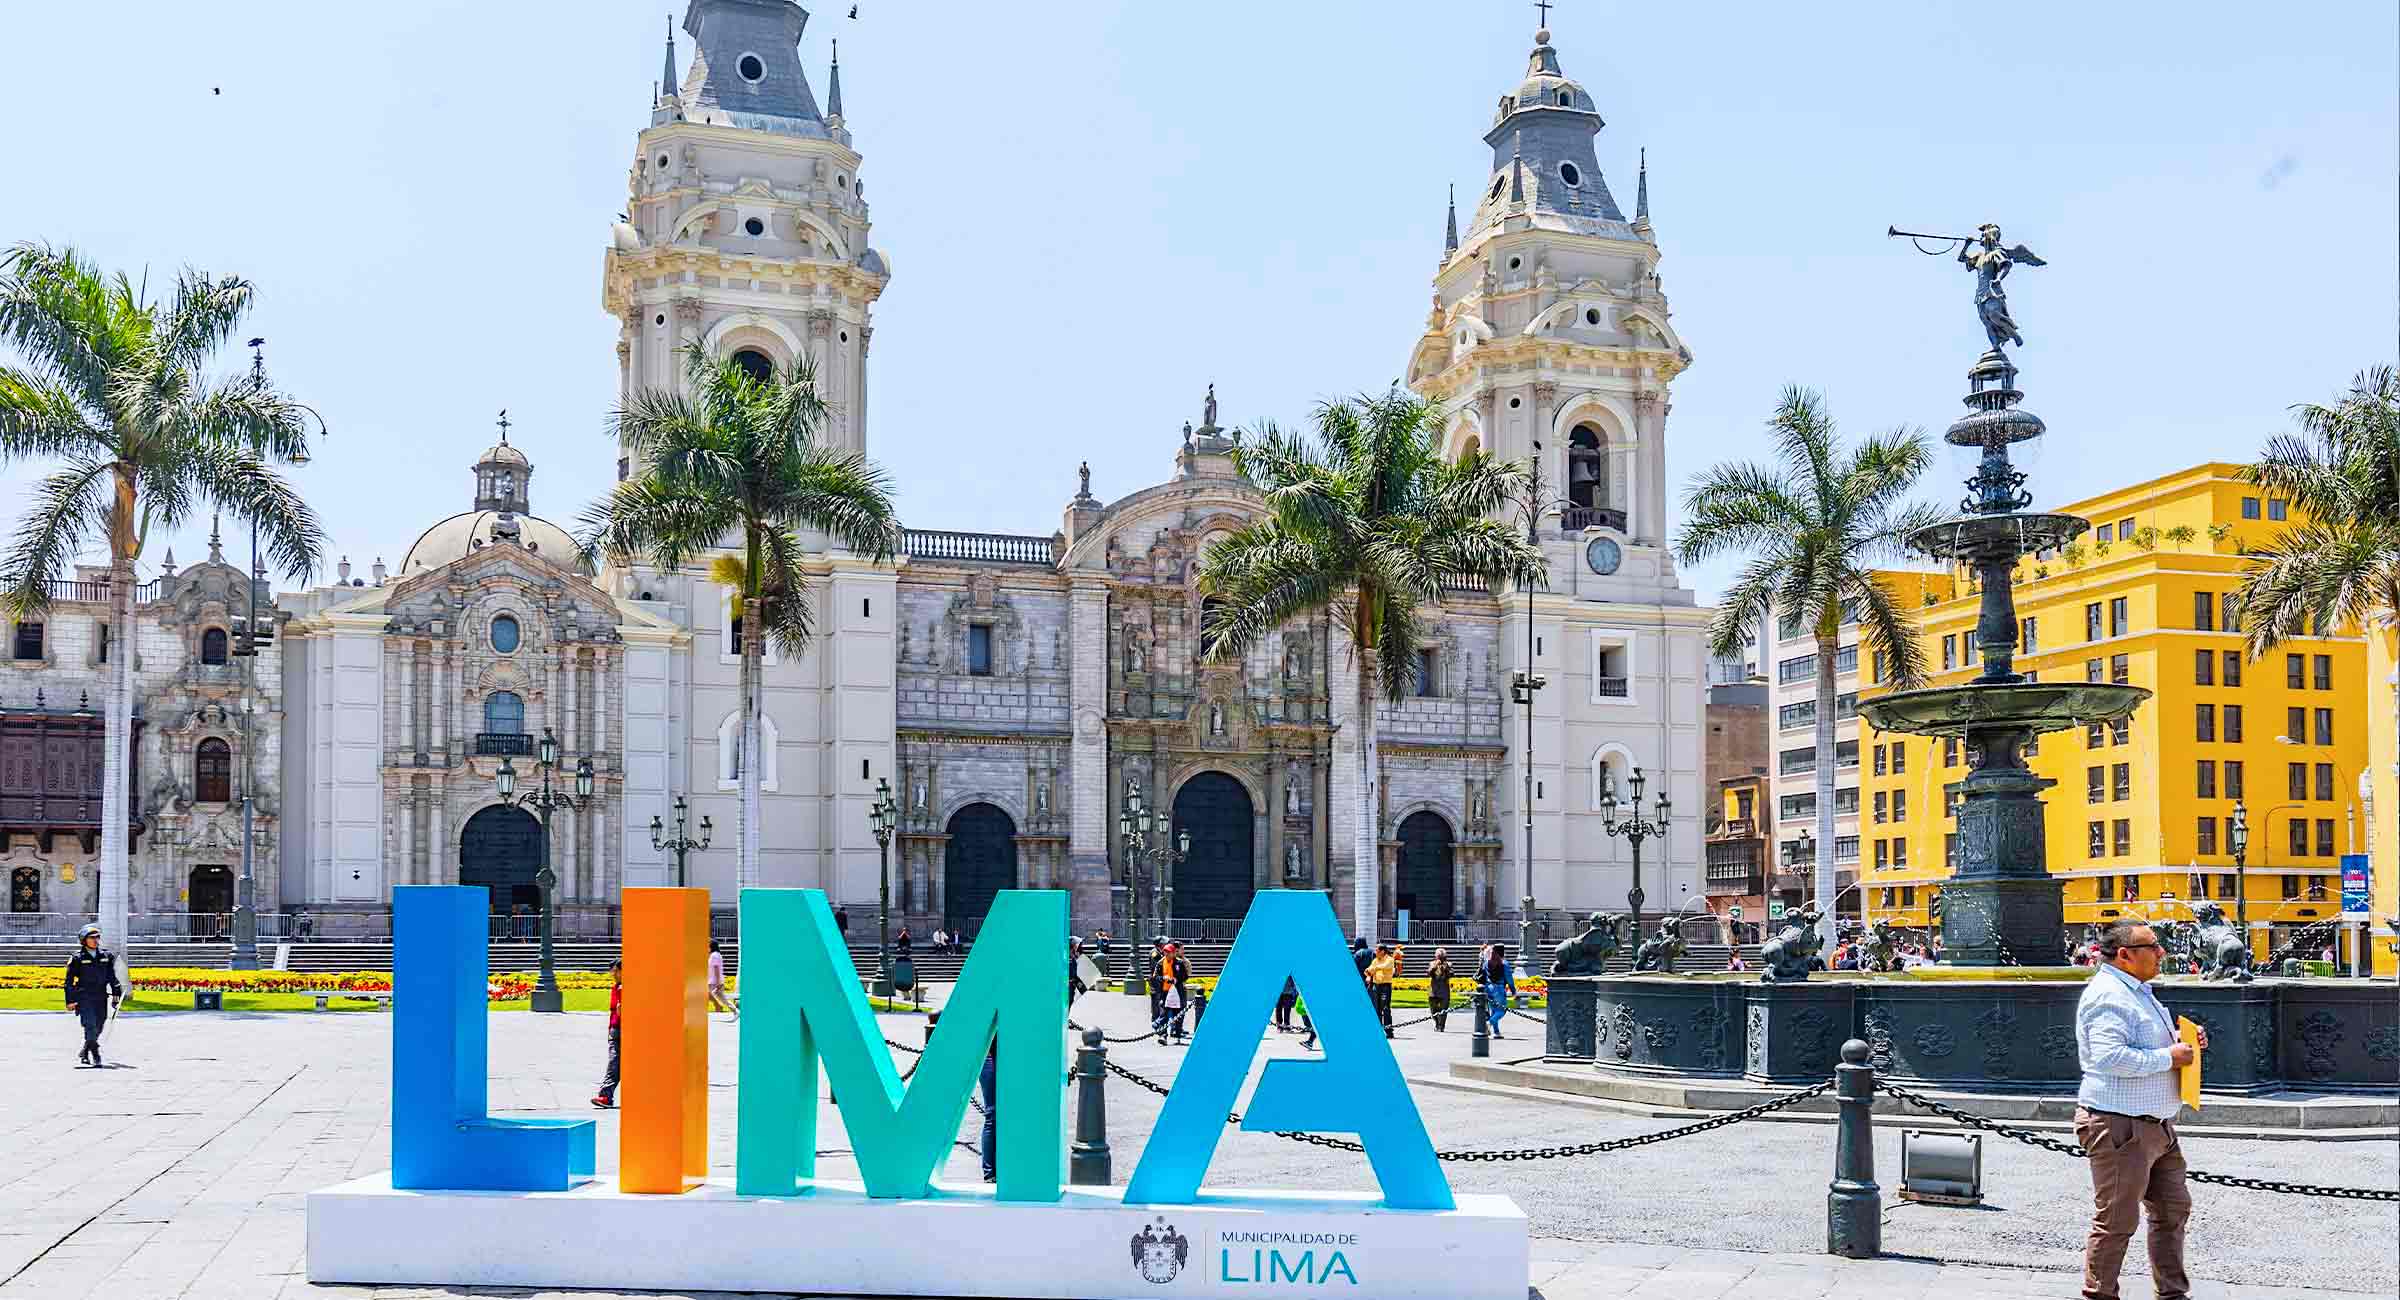 Day 1 (June 03): LIMA